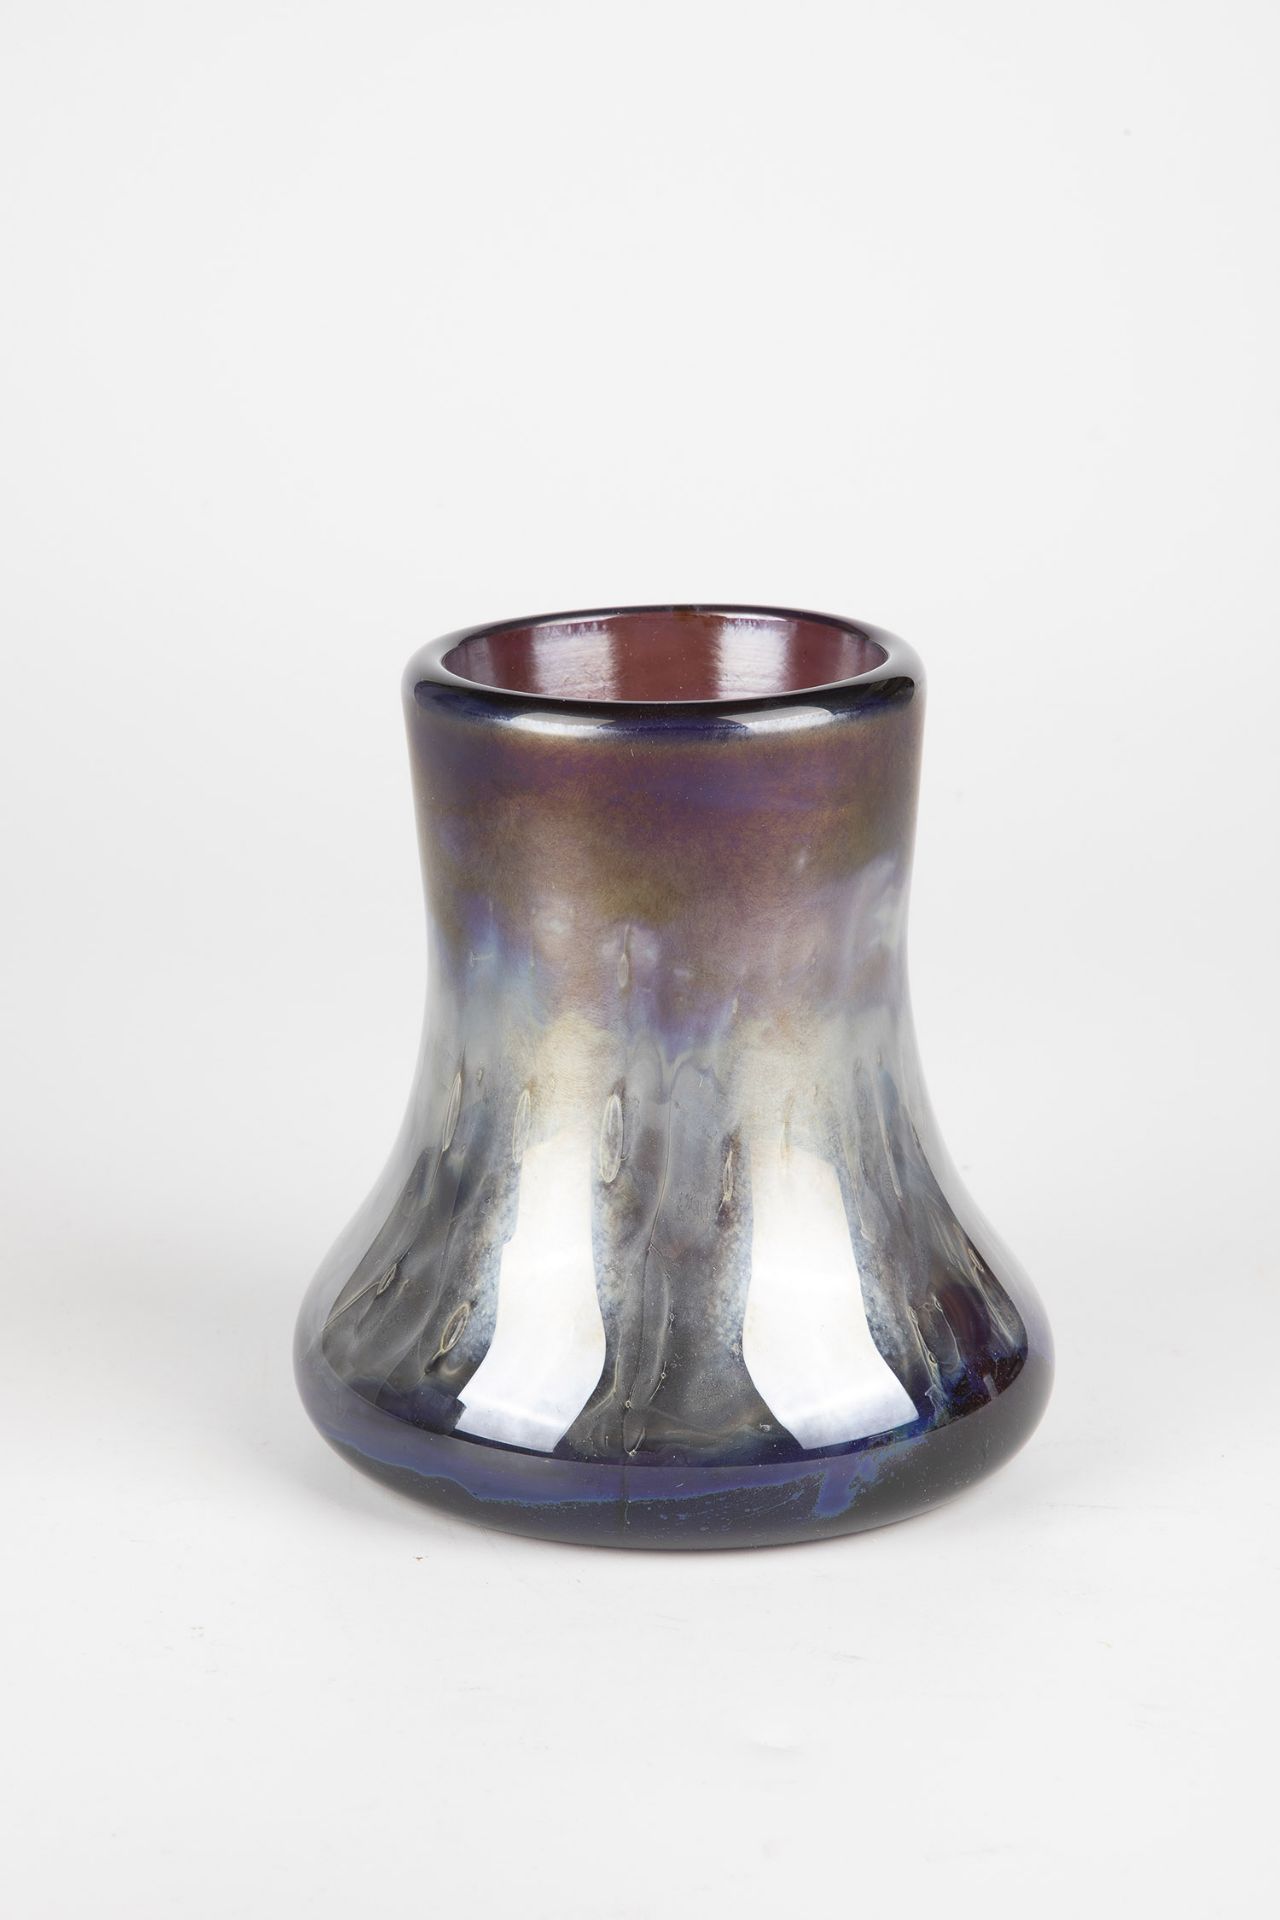 Vase Robert Coleman, 1976 Violet glass with melted color oxides. Iridescent. Signed and dated in